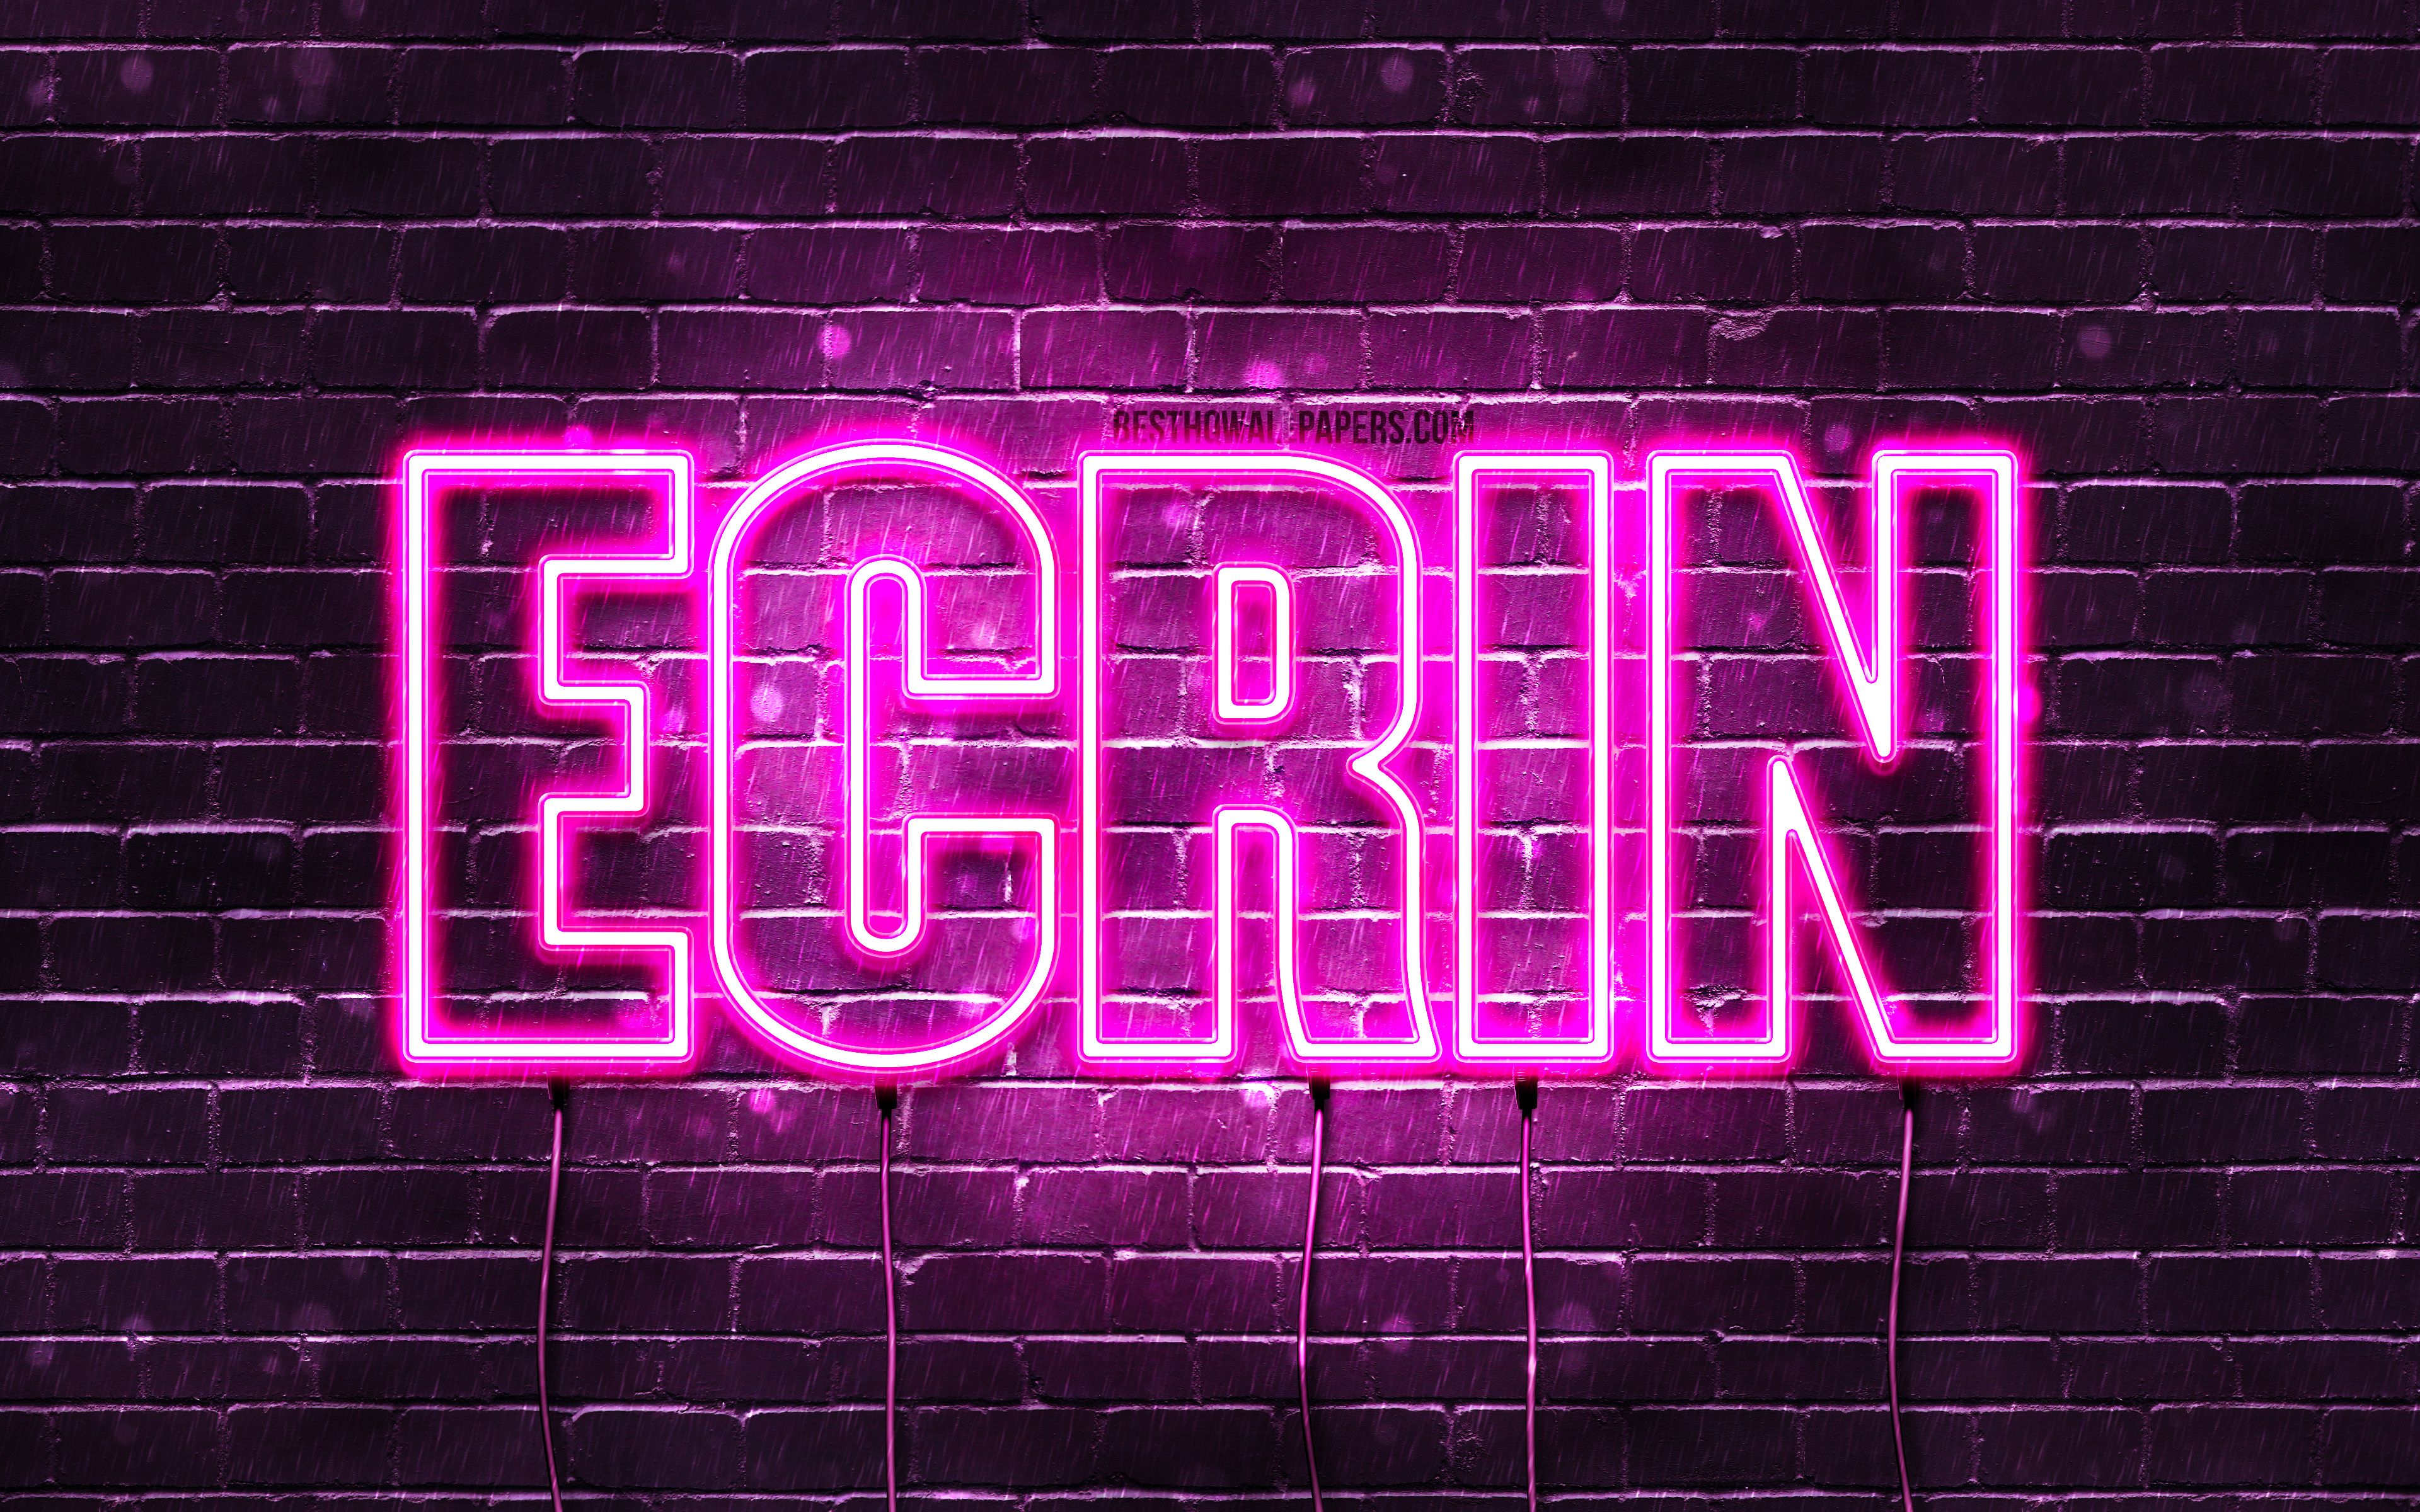 Download wallpaper Ecrin, 4k, wallpaper with names, female names, Ecrin name, purple neon lights, Happy Birthday Ecrin, popular turkish female names, picture with Ecrin name for desktop with resolution 3840x2400. High Quality